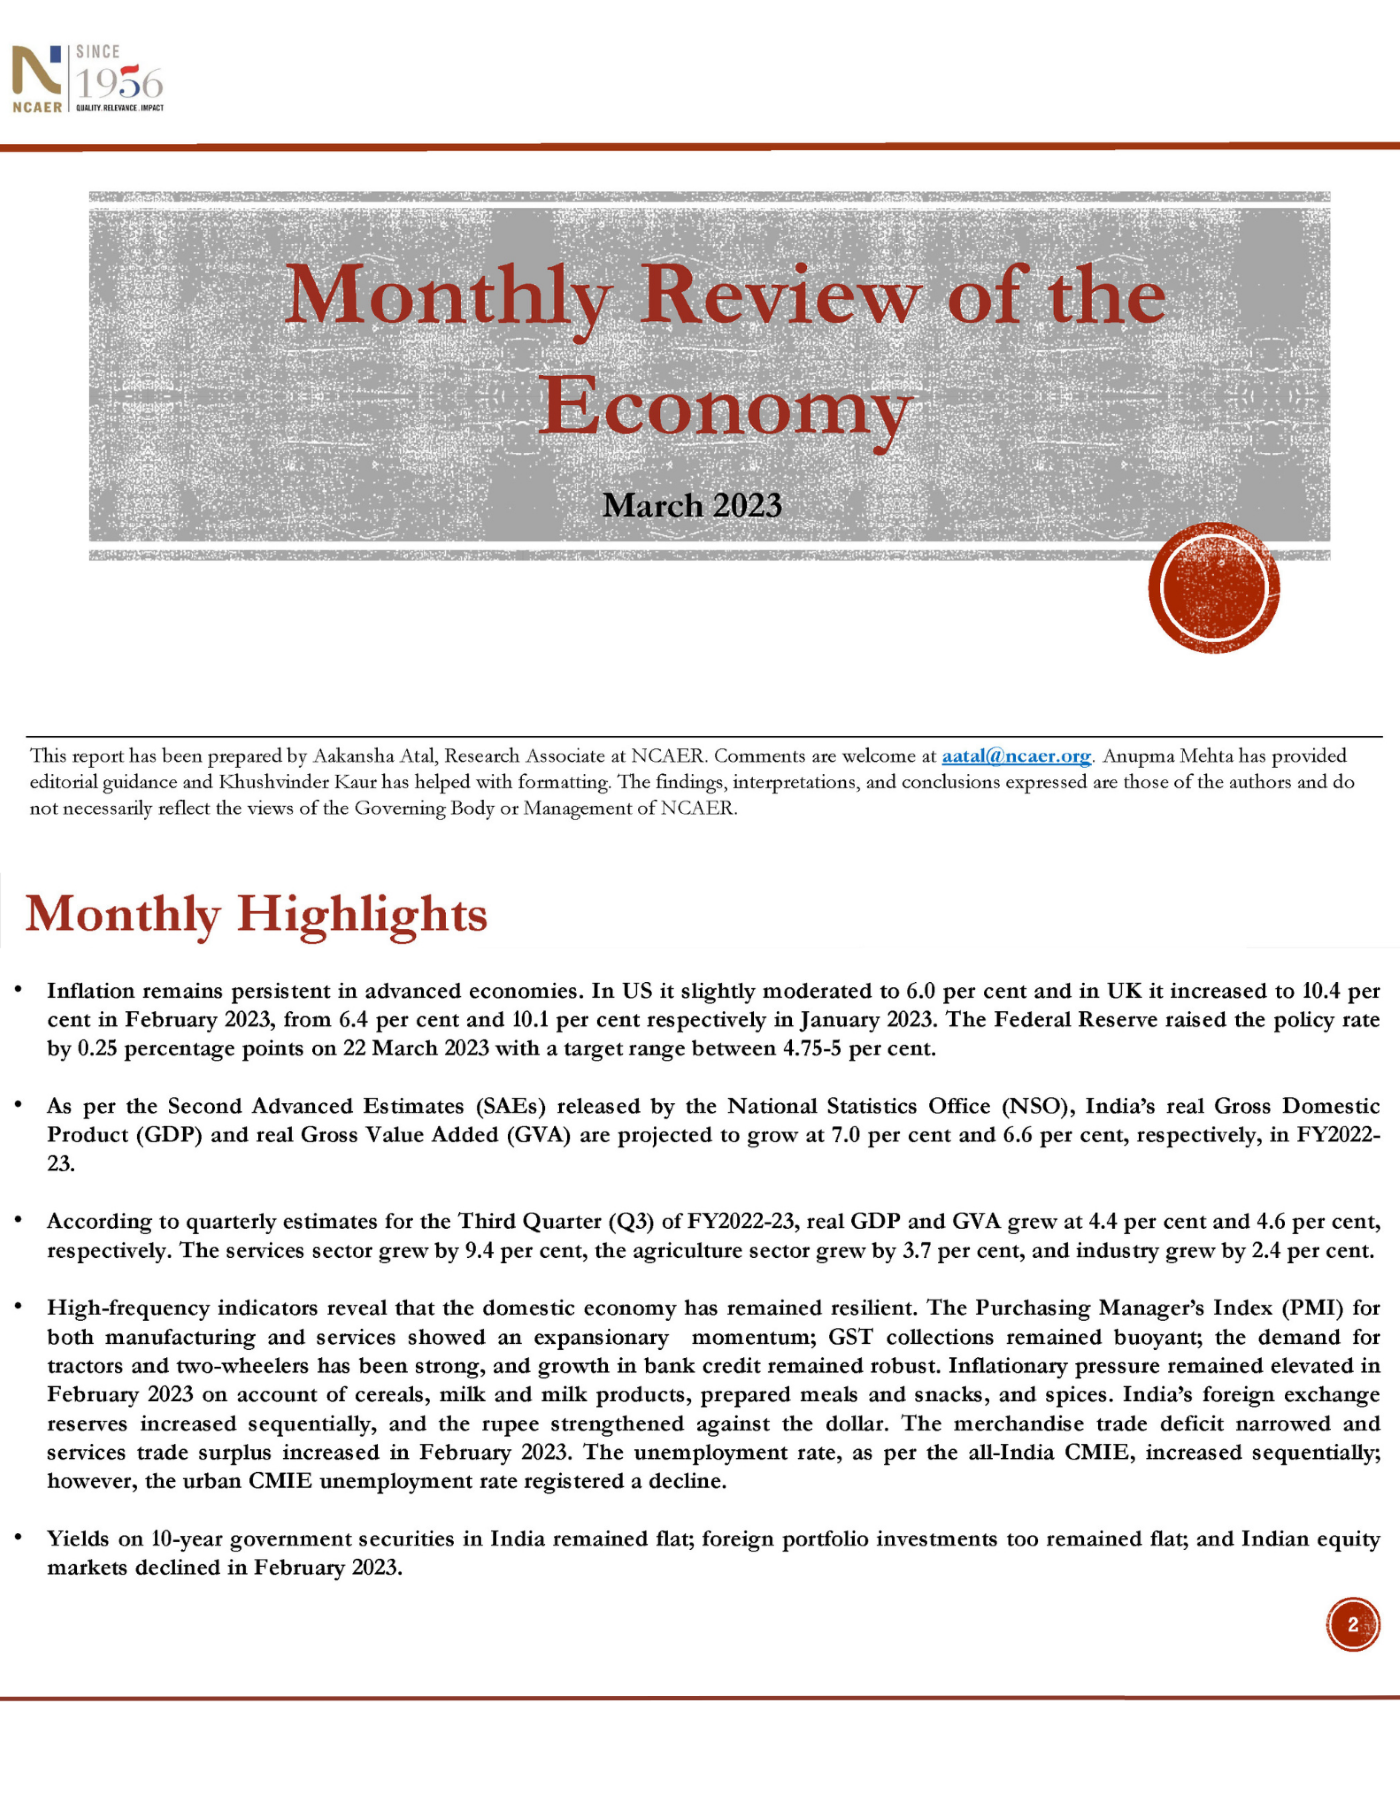 Monthly Review of the Economy: March 2023